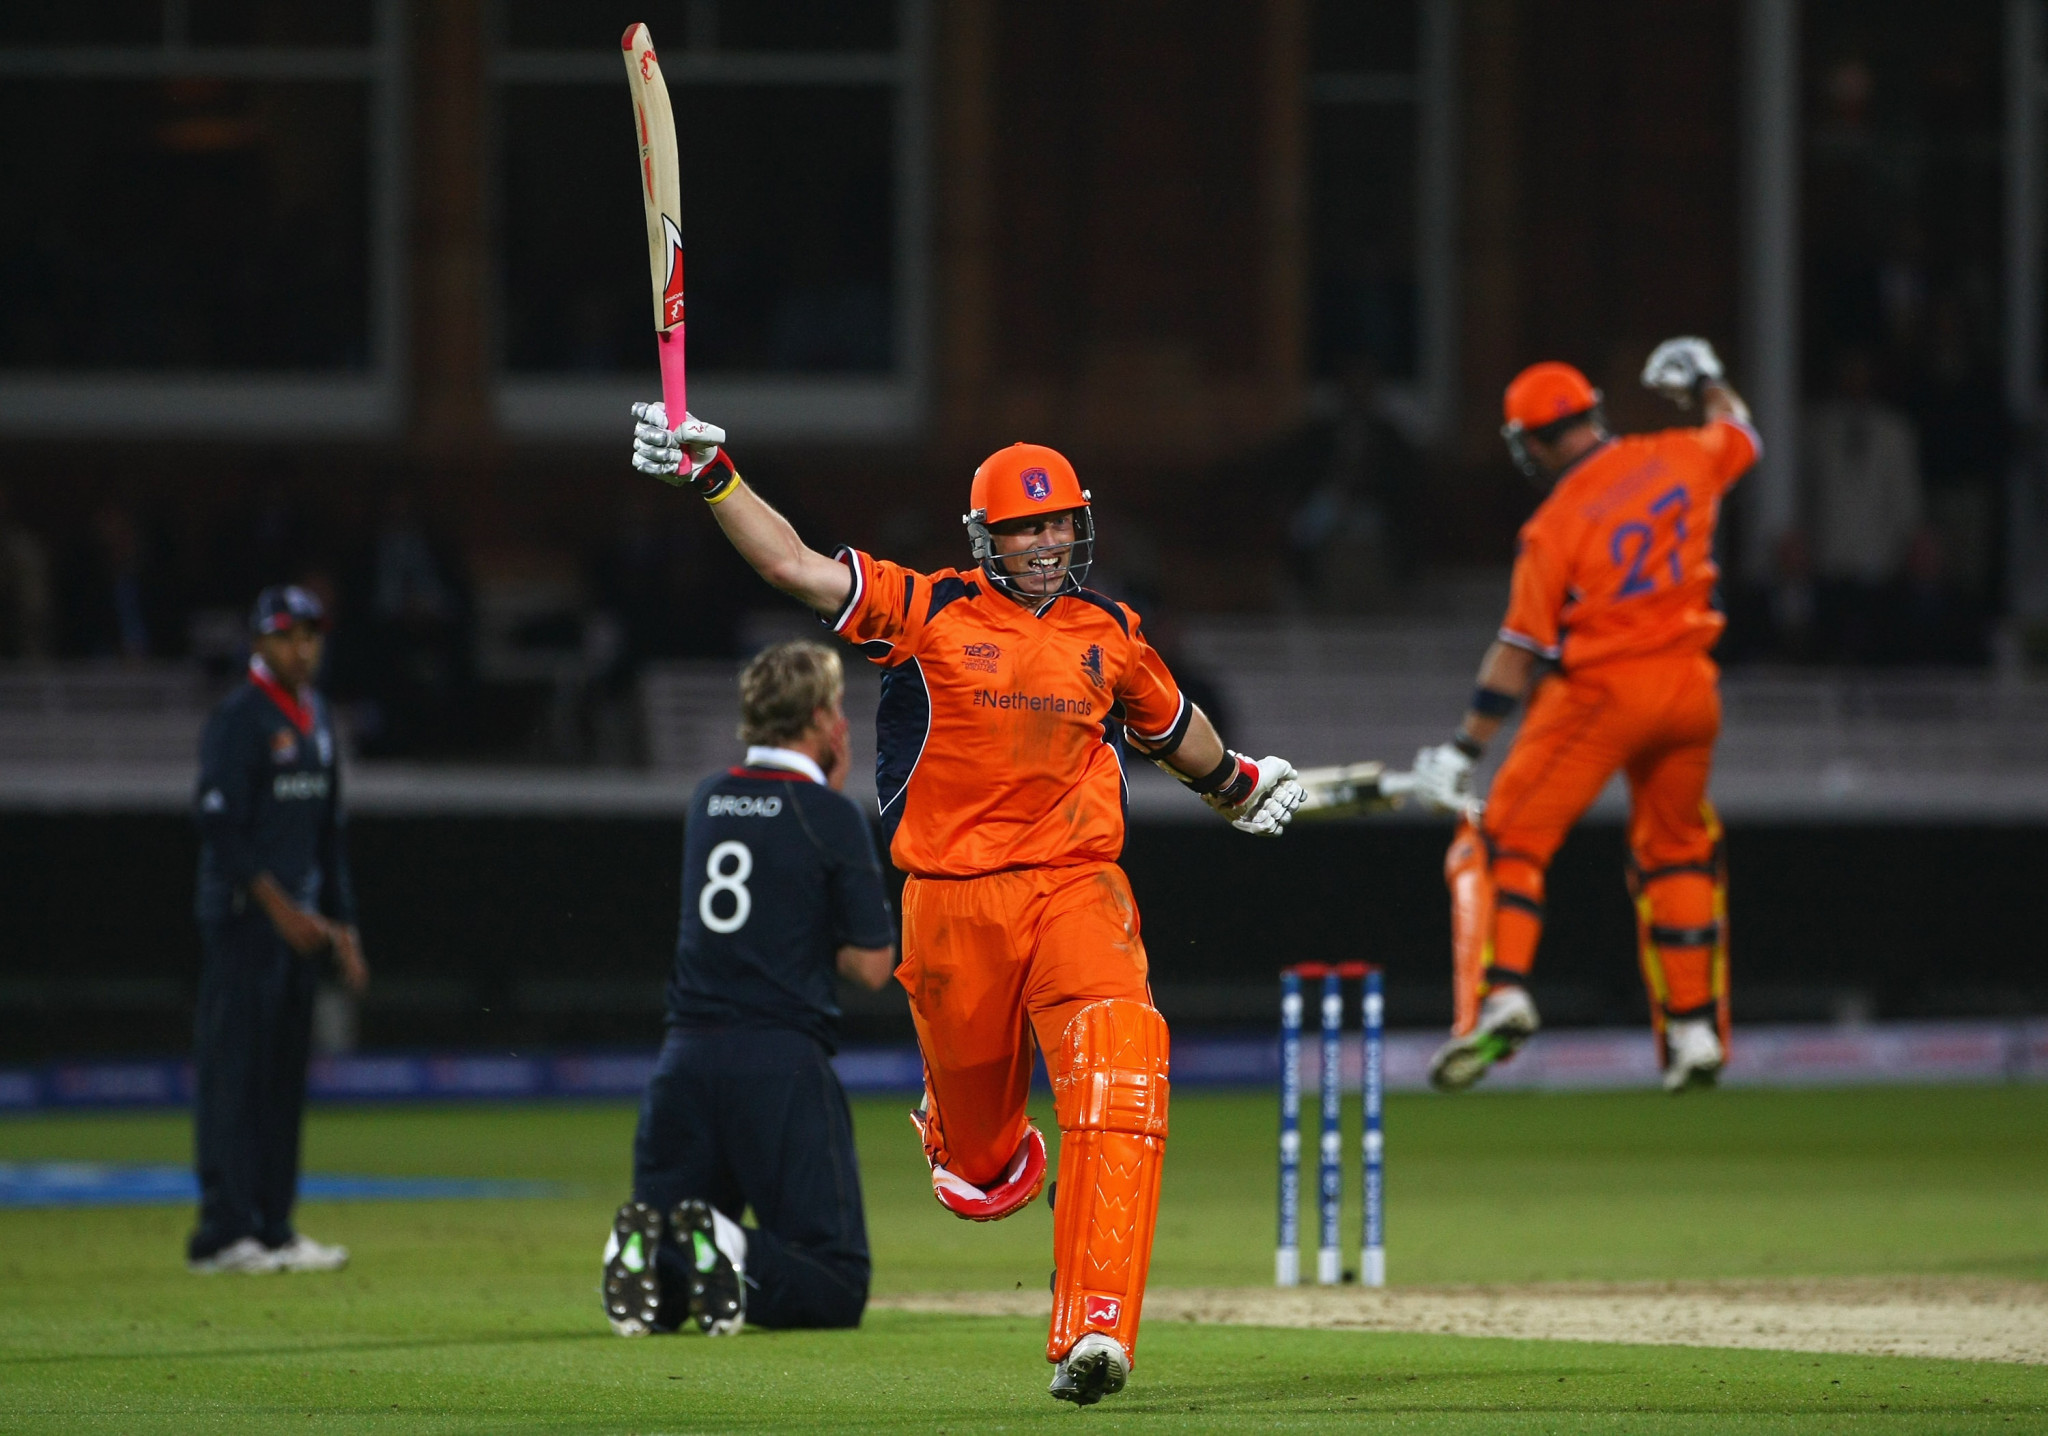 The Netherlands famously beat England in the opening game of the 2009 World Twenty20 - the inaugural edition of the tournament, which was hosted in England ©Getty Images